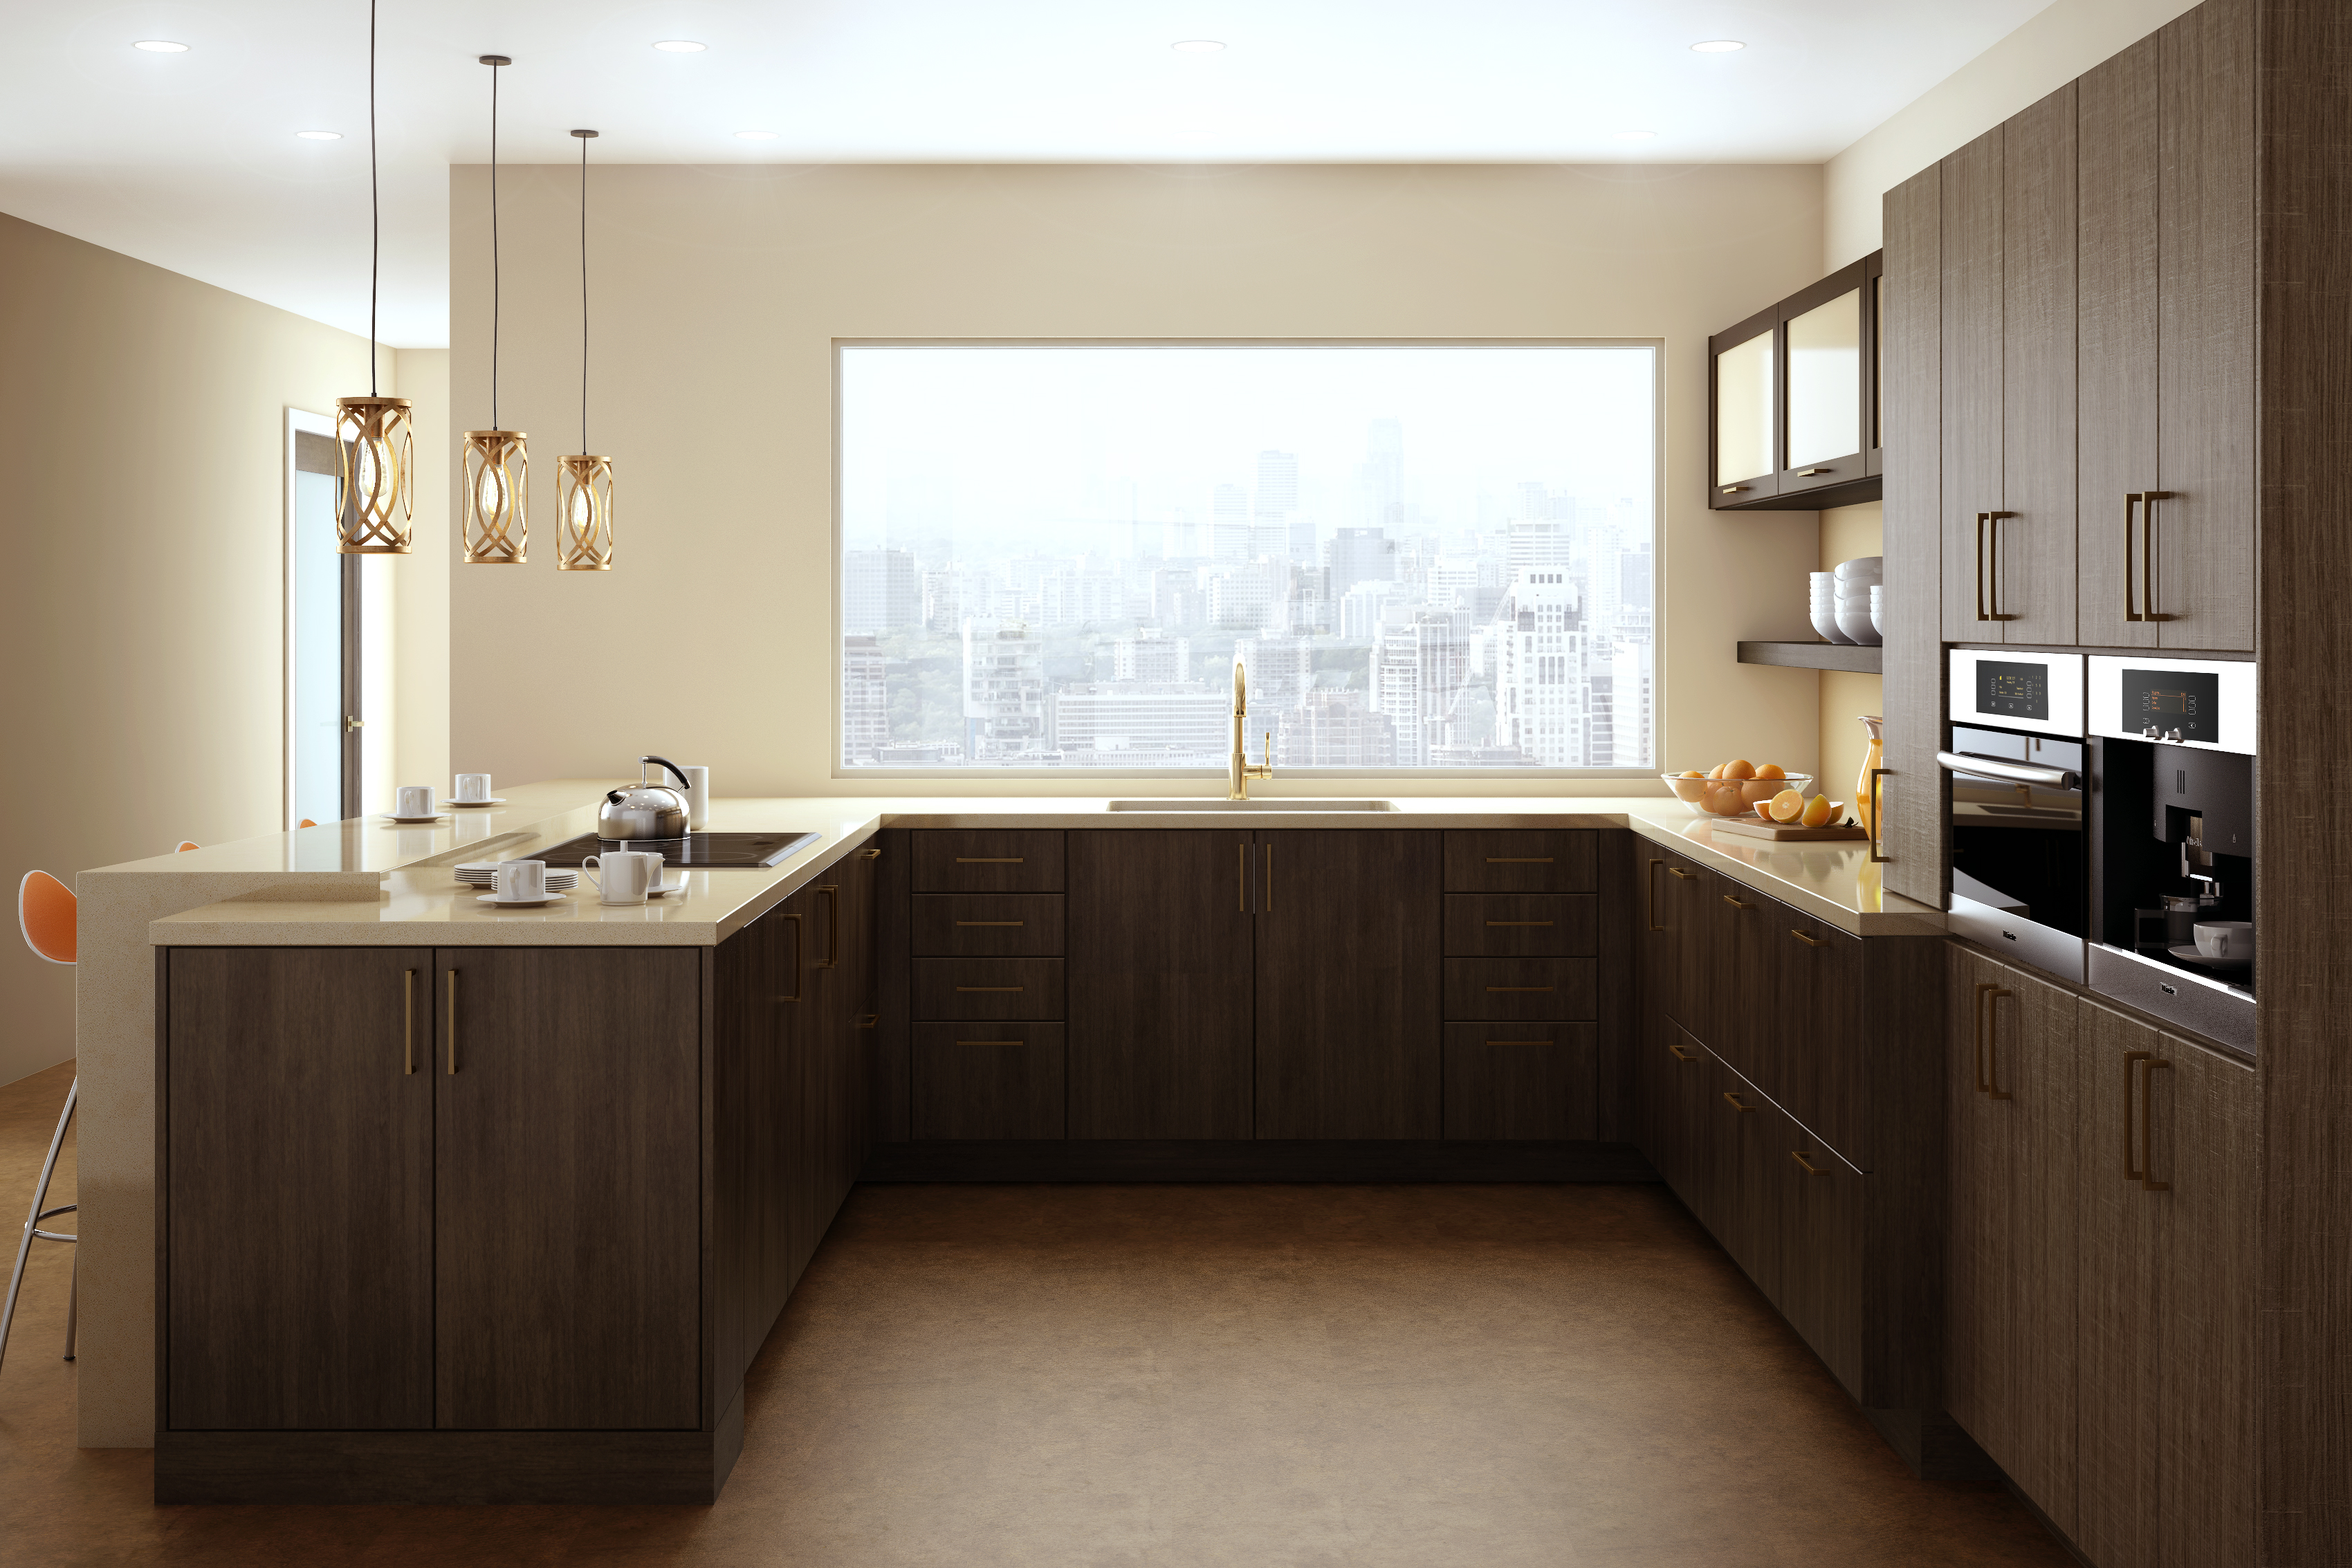 A city loft apartment with a stunning view and modern cabinets in a sleek and contemporary kitchen design. Featuring Dura Supreme frameless cabinets.